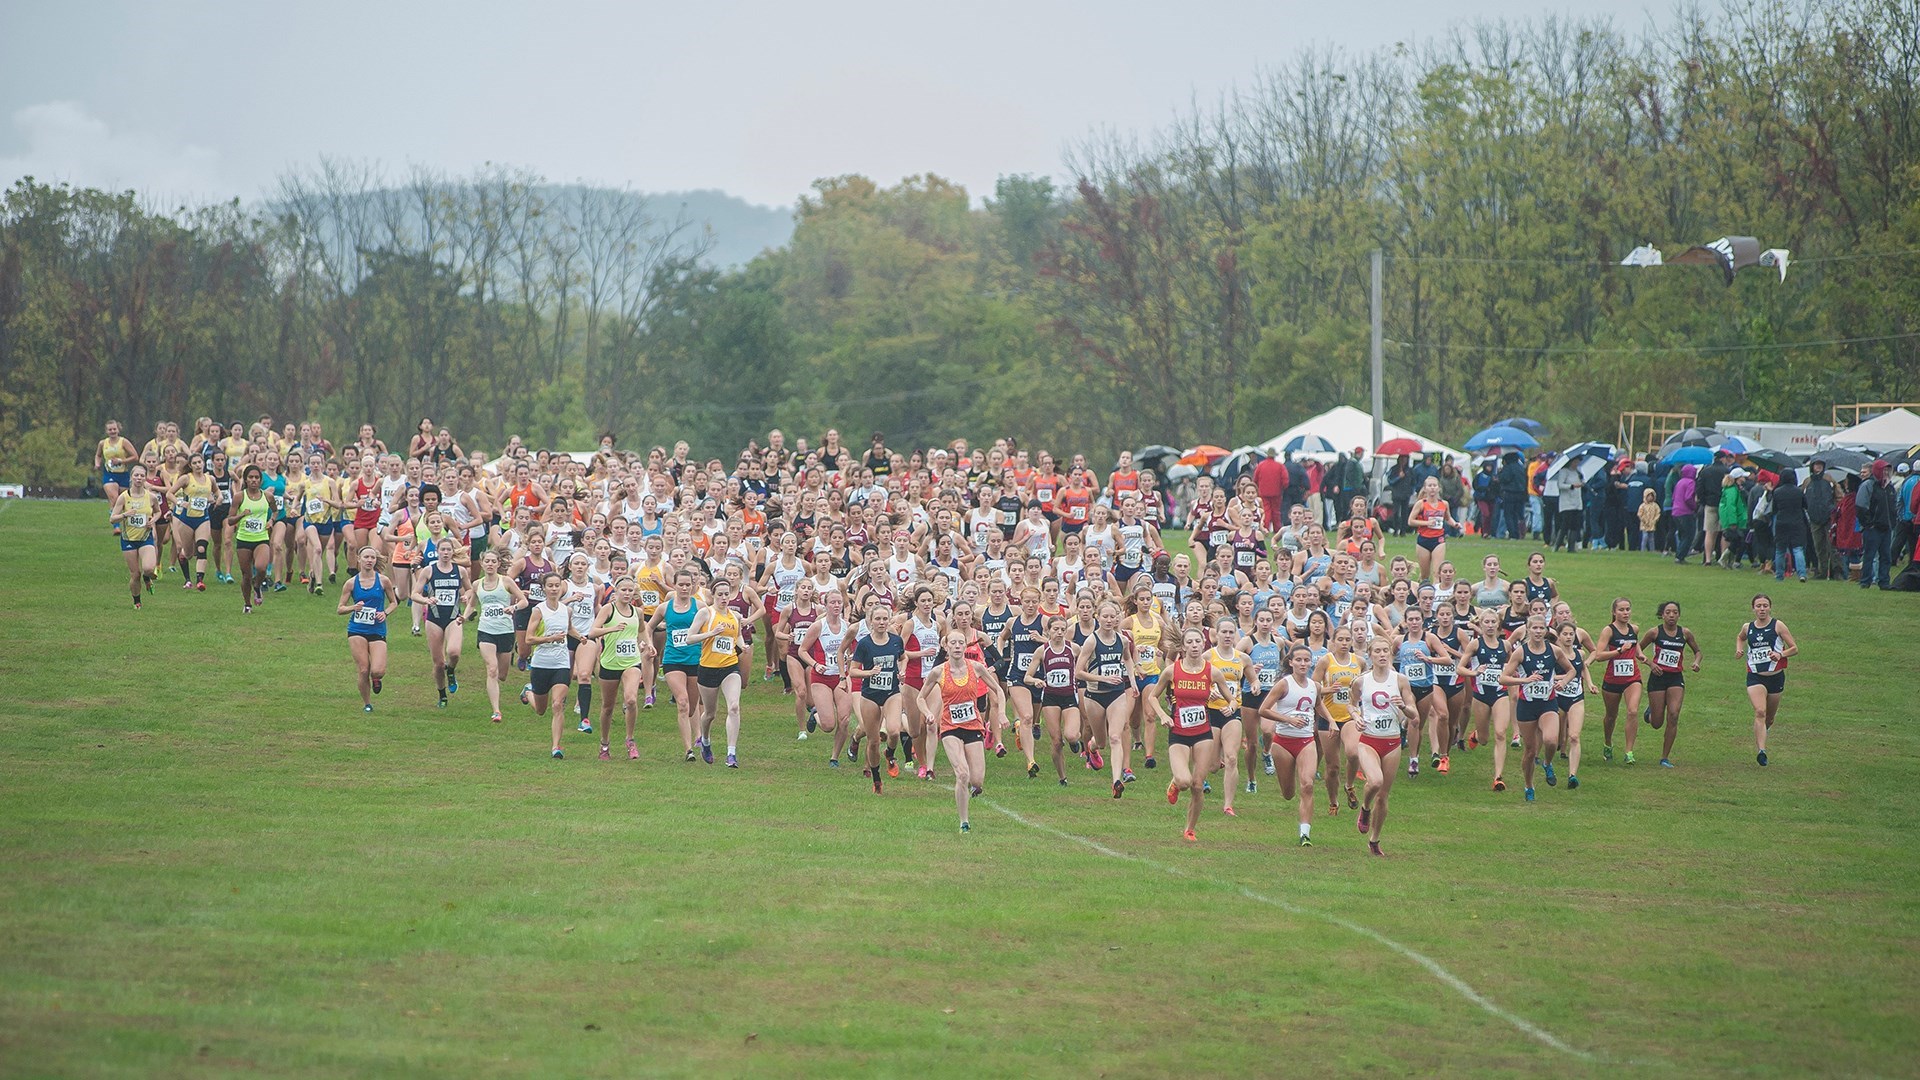 Goodman Campus Cross Country Course - Cross Country Running - HD Wallpaper 